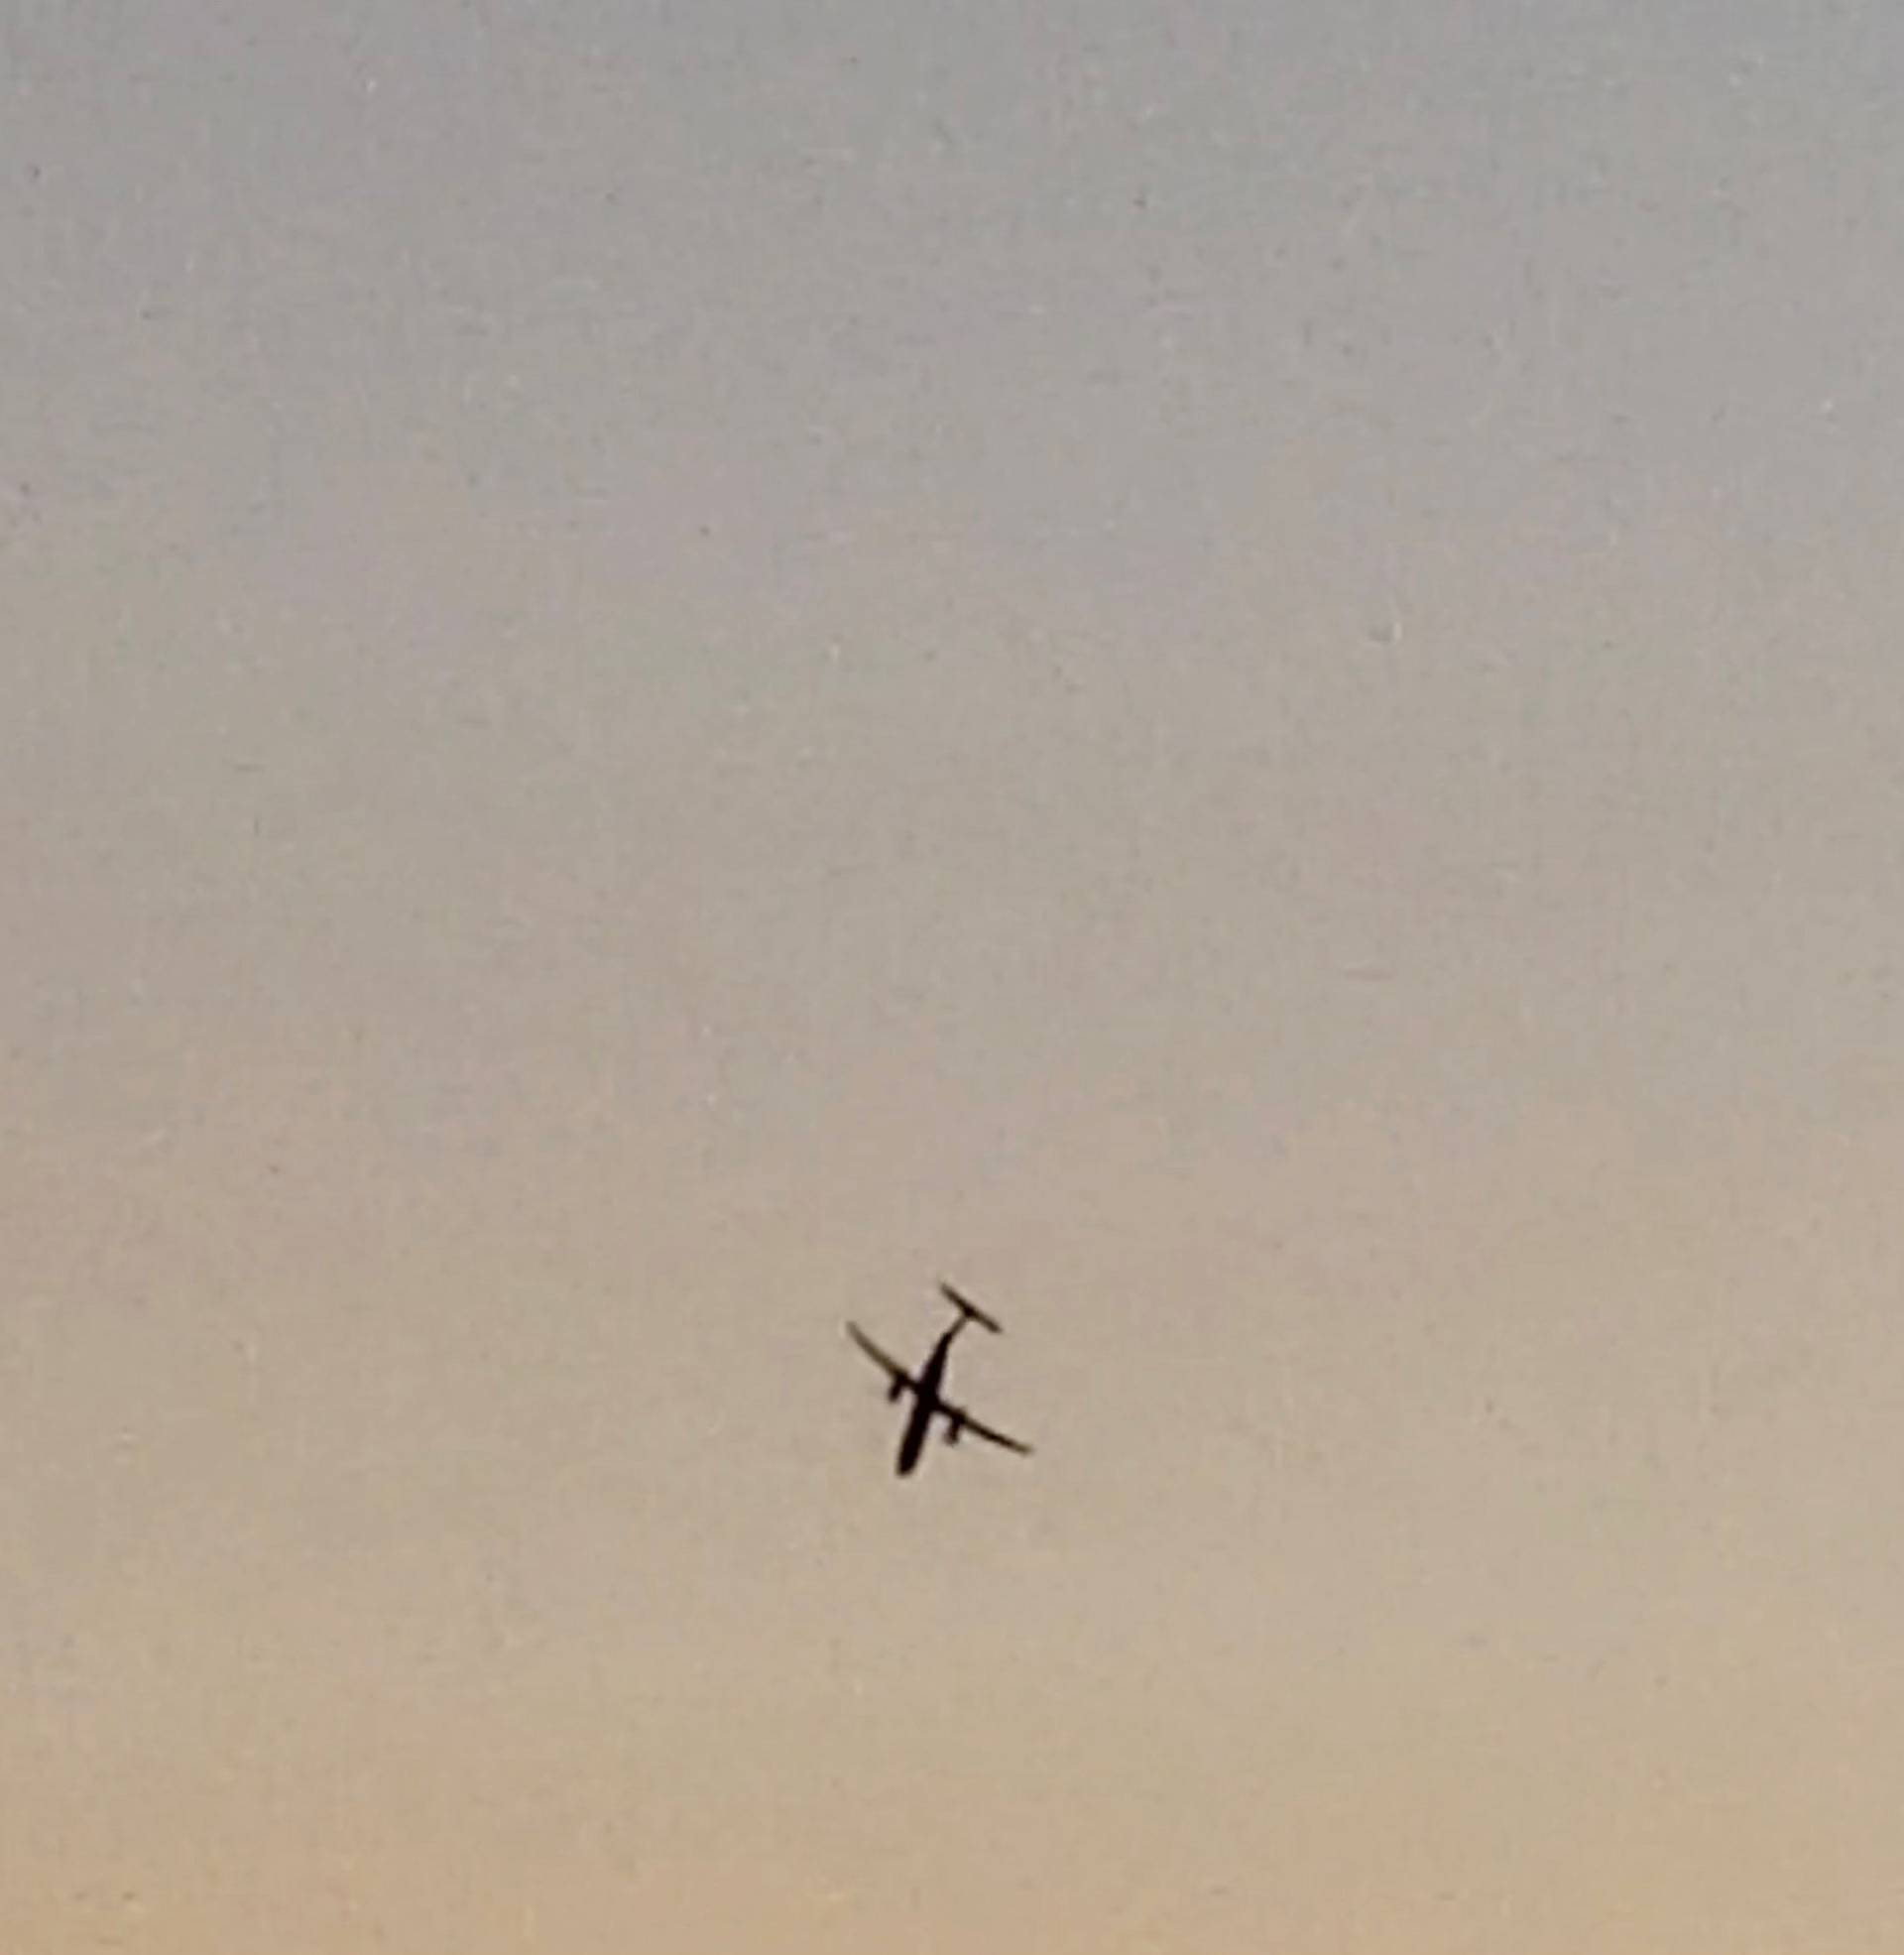 A Horizon Air Bombardier Dash 8 Q400, reported to be hijacked, flies over University Place in this still image taken from a video obtained from social media